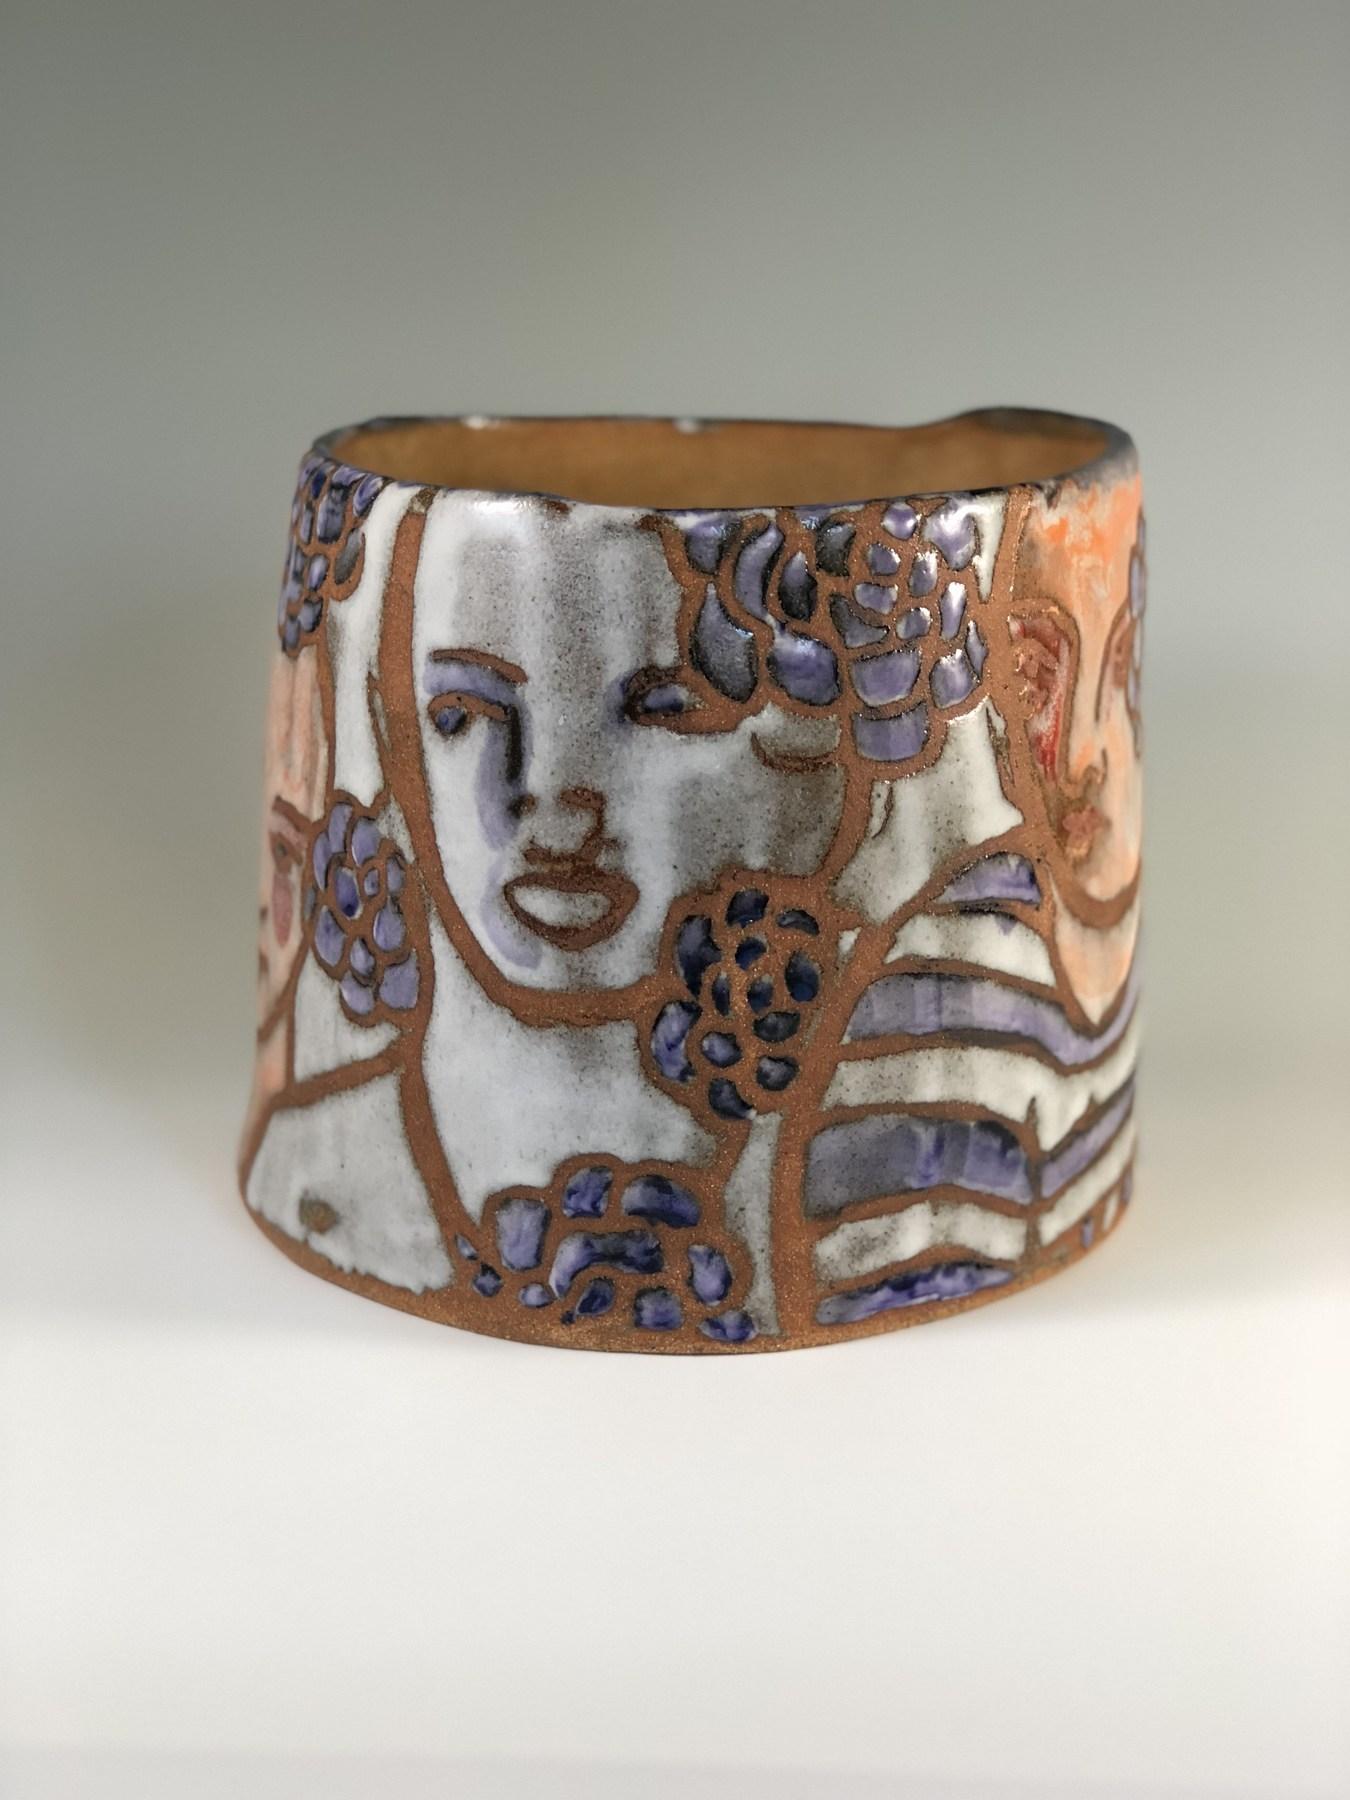 Title: Pot with Figures on Death Valley Clay
Materials: Death Valley Clay, Matte White Glaze, Underglazes
Date: 2018
Dimensions: 7 x 27 x 8 inches


Elizabeth Currer is an artist living and working in Pasadena. Fine Art graduate from Occidental